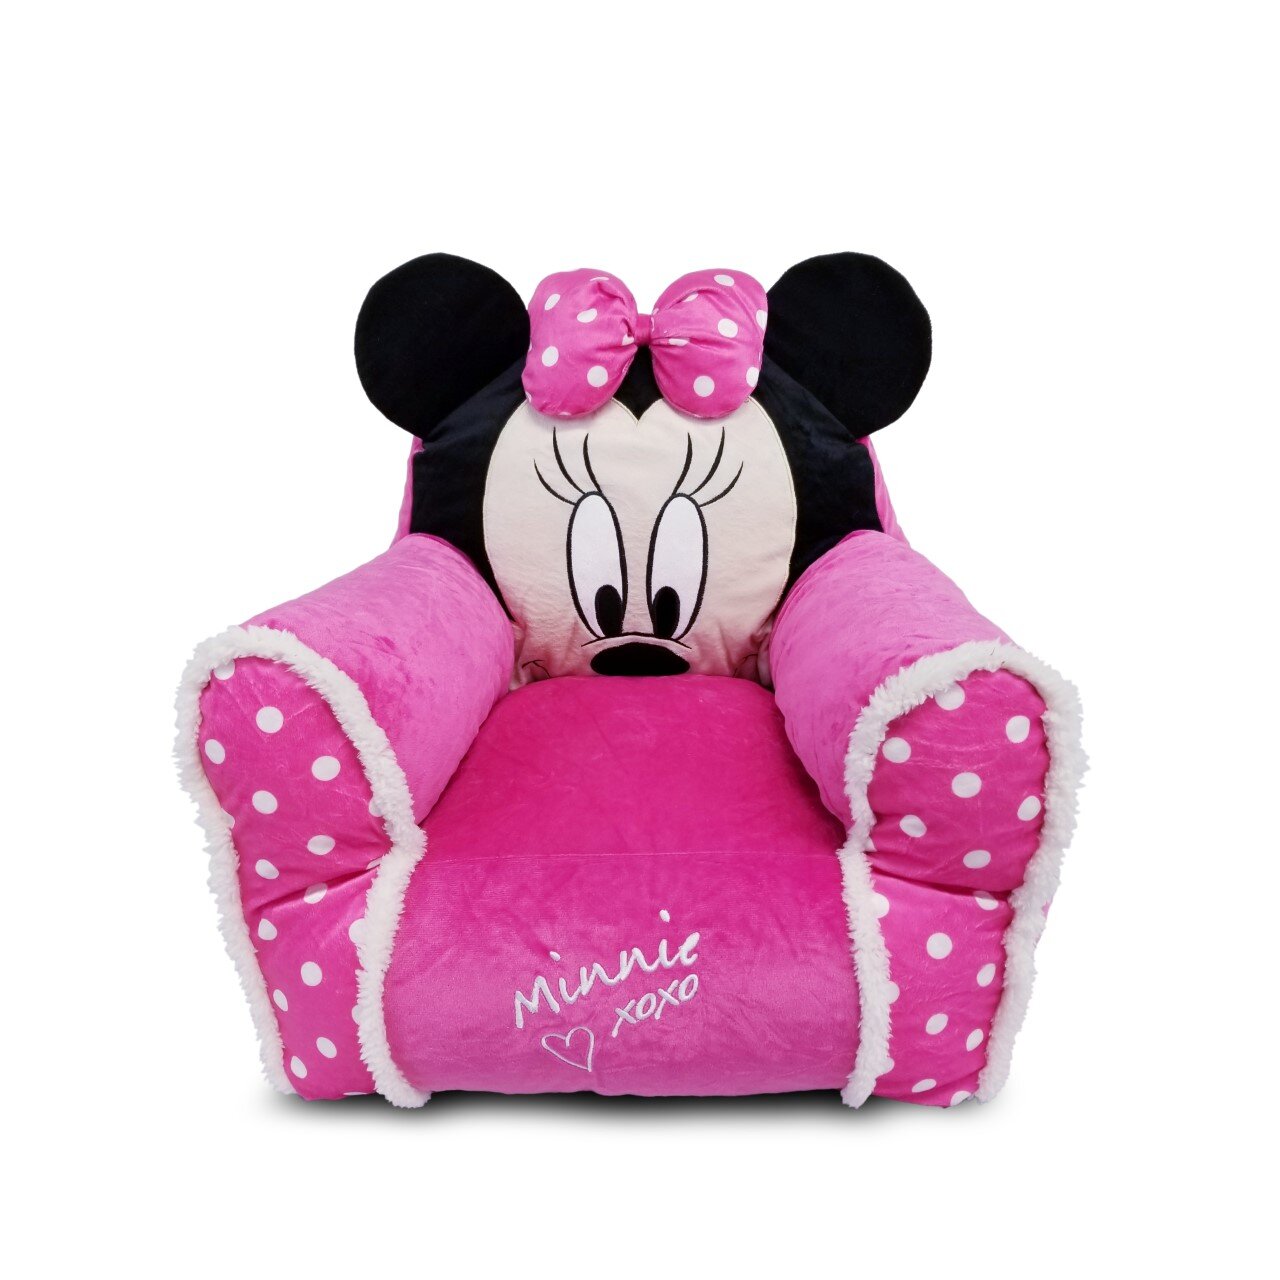 Minnie Mouse Polka Dotted Toddler Figural Small Classic Bean Bag